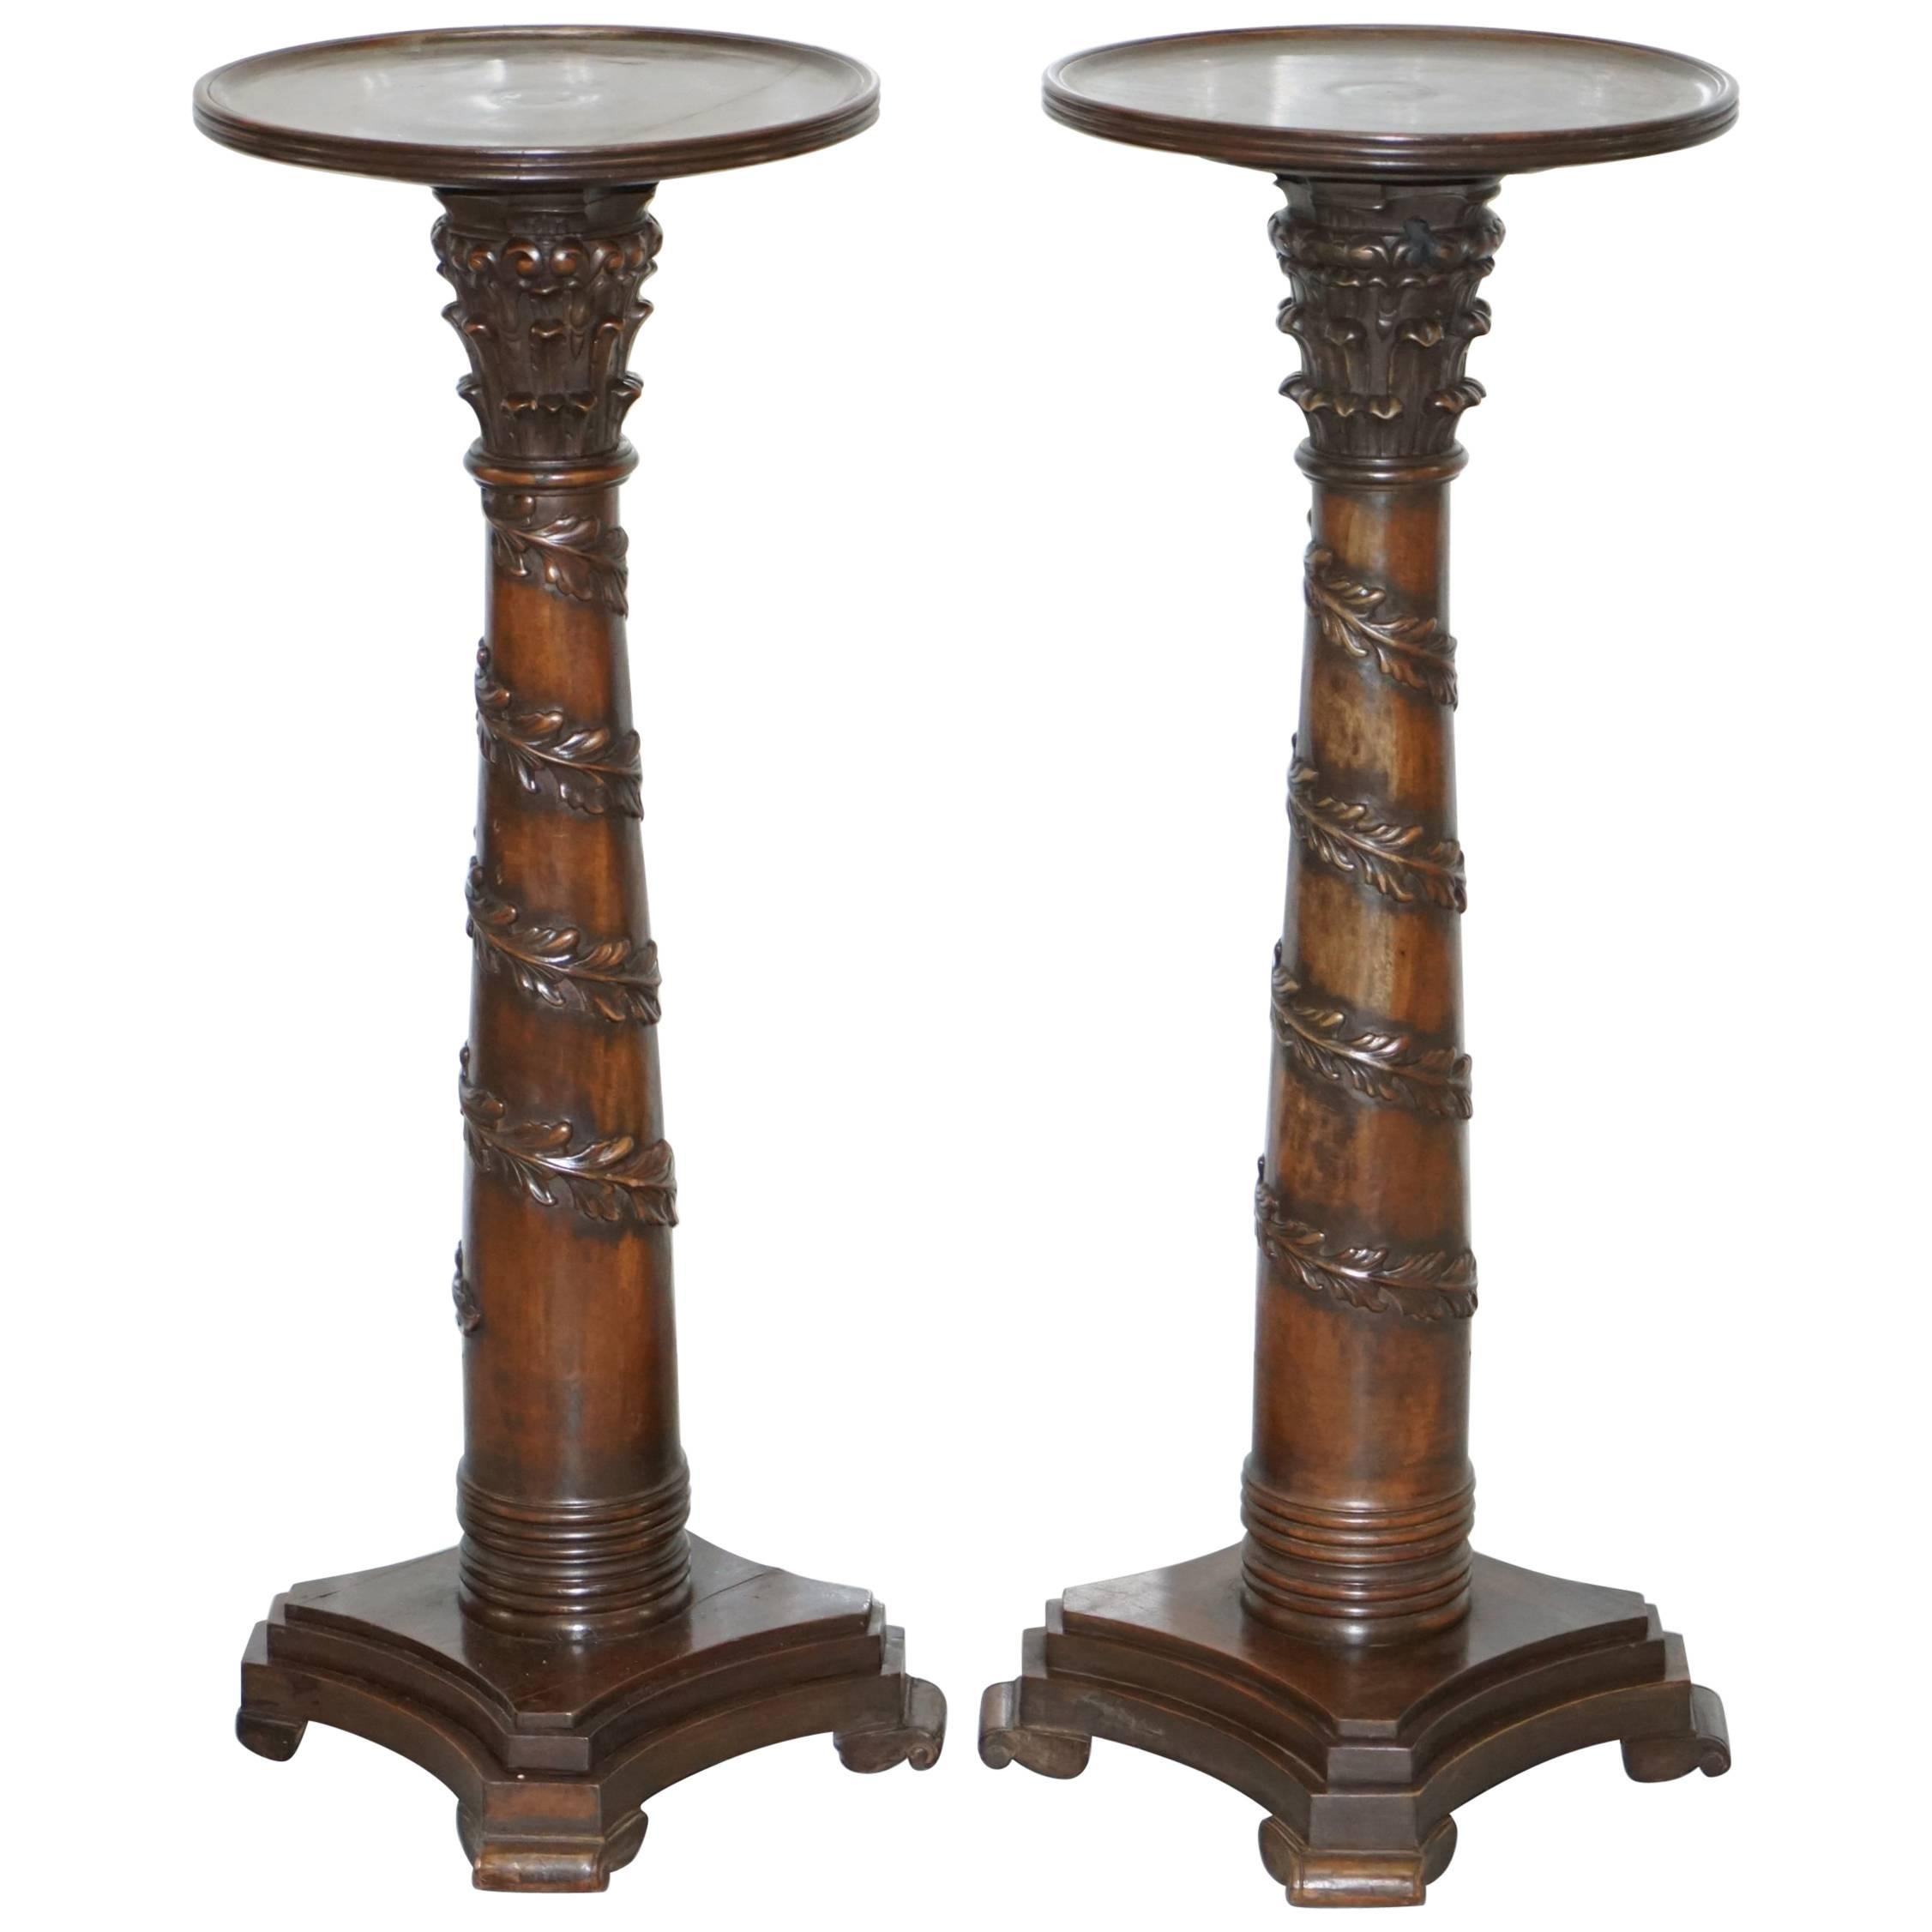 Pair of 18th Century Style Mahogany Jardiniere Display Stands Hand-Carved